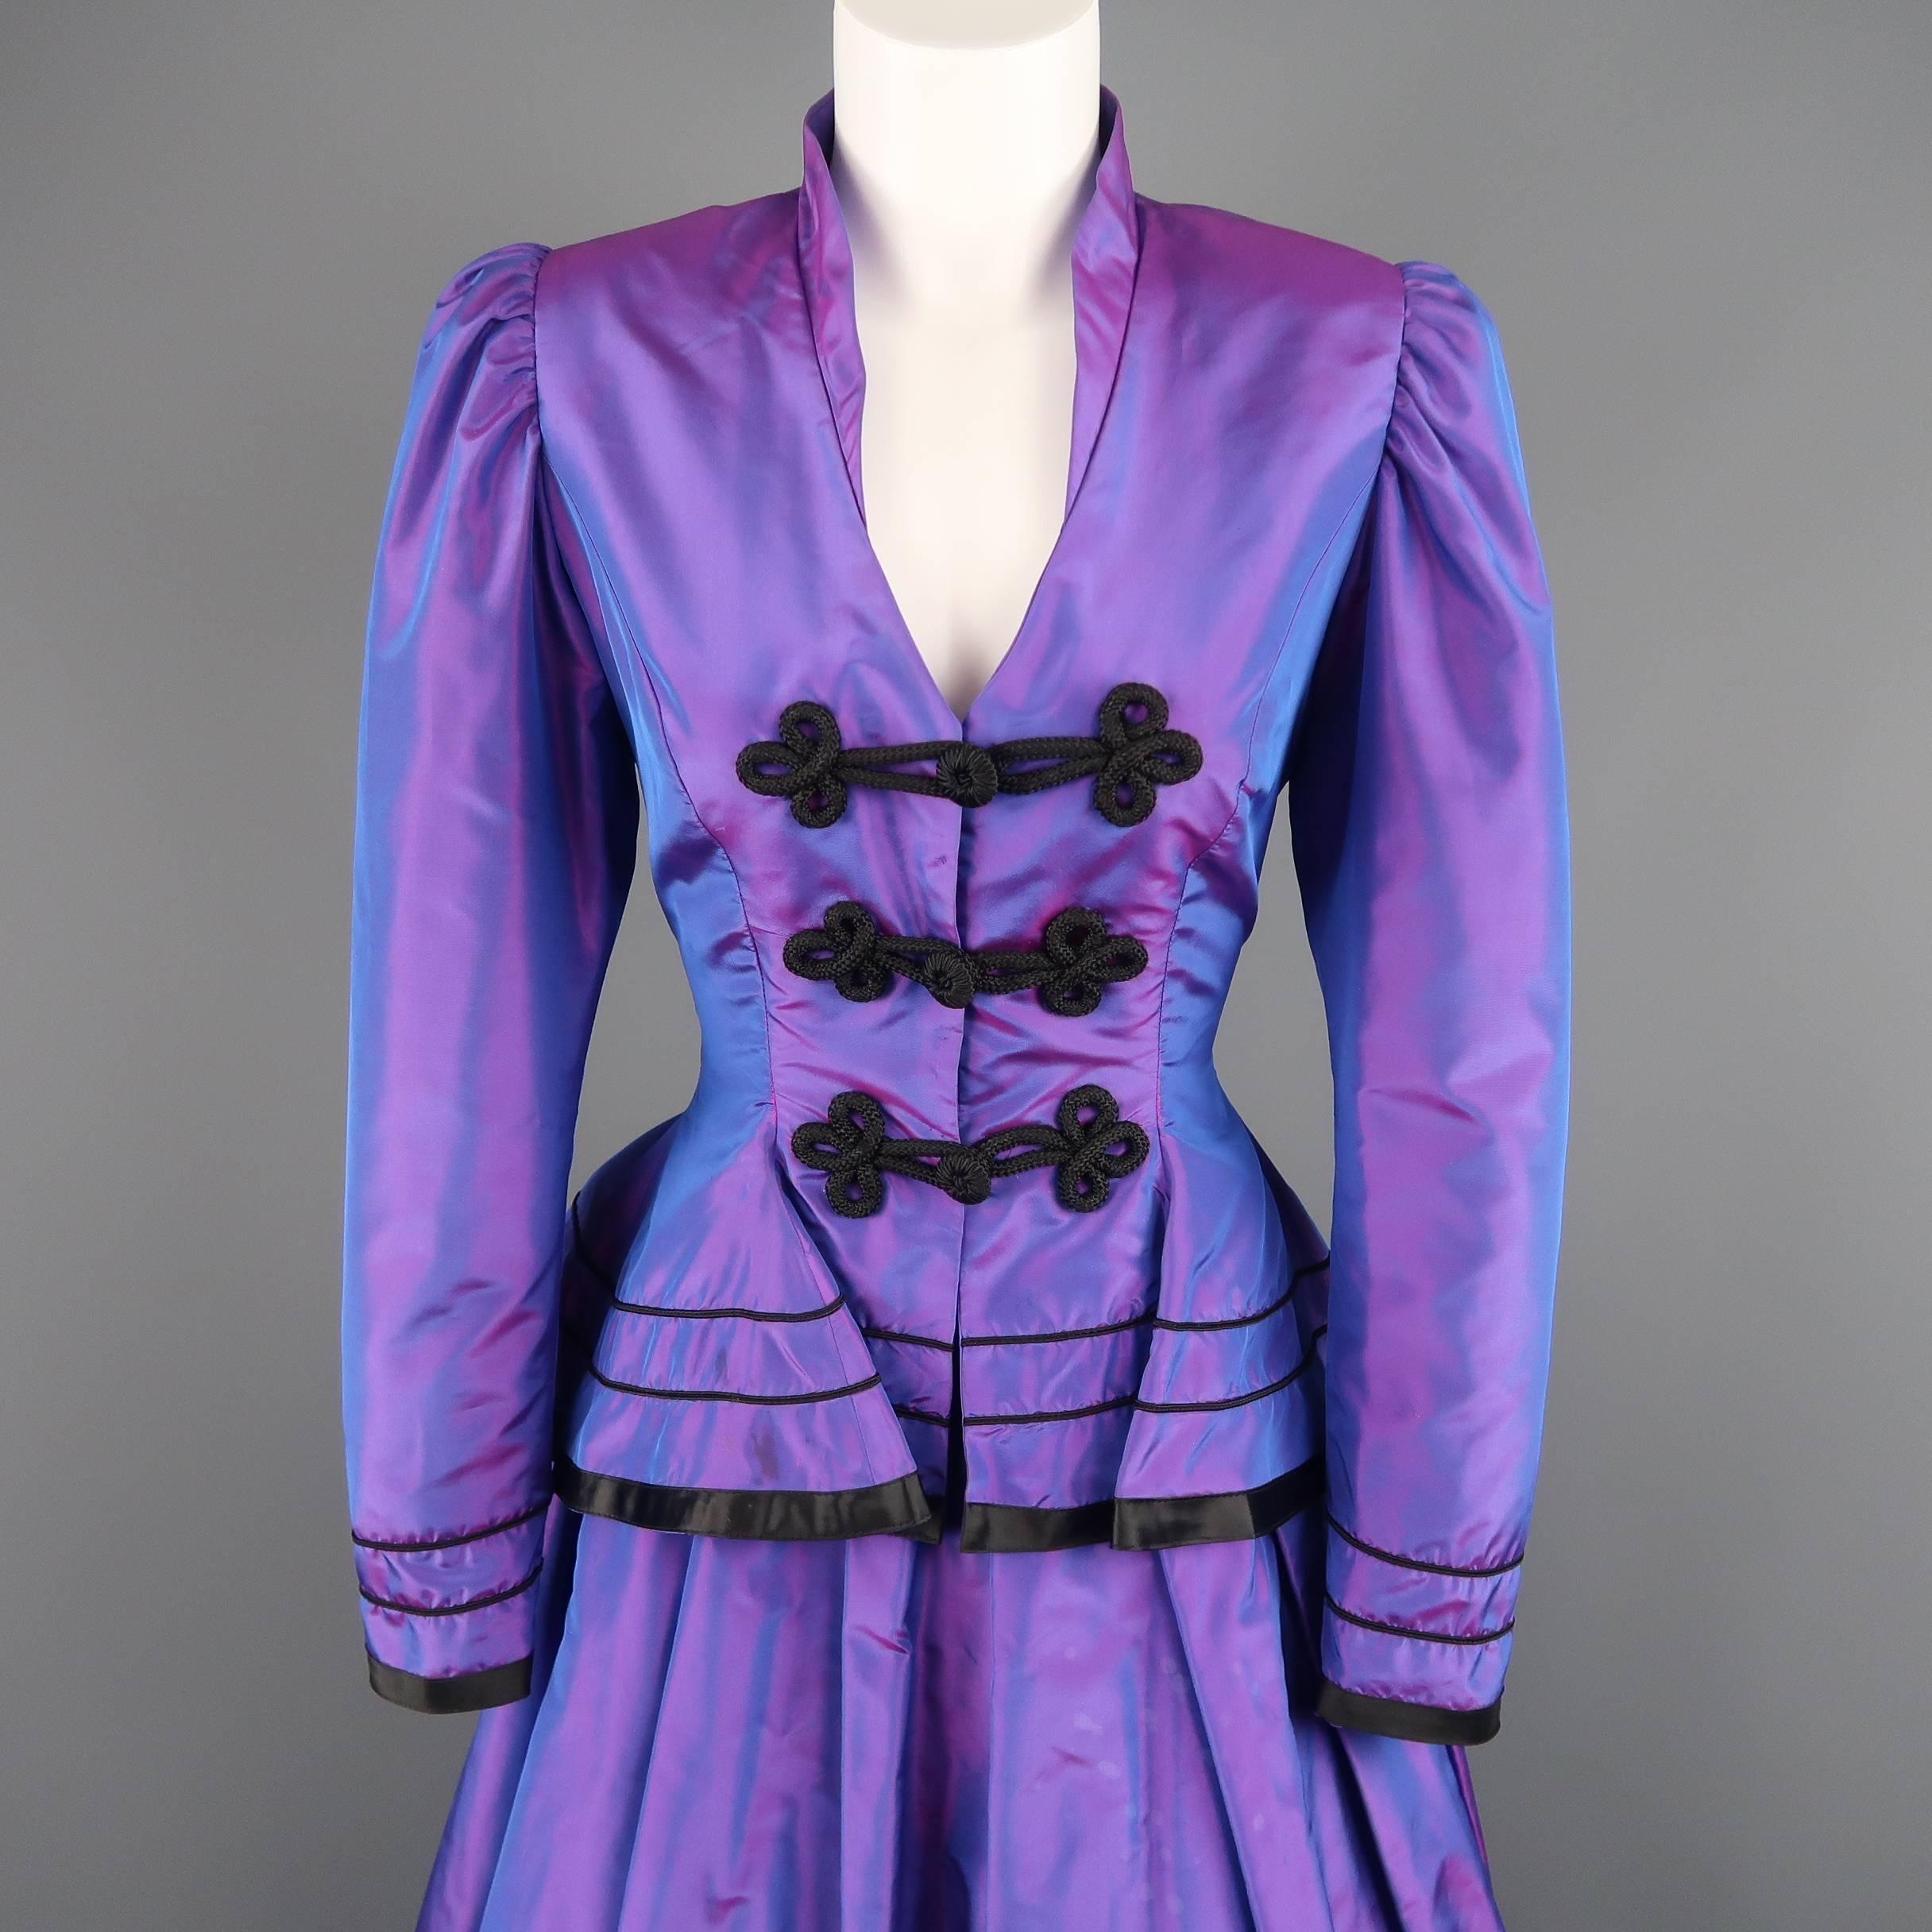 Vintage Lindka Cierach for Neiman Marcus evening ensemble comes in a beautiful purple iridescent silk taffeta and includes a tailored jacket with puff shoulders, triple frog closures, ruffled peplum hemline, and black grosgrain stipe piping with a